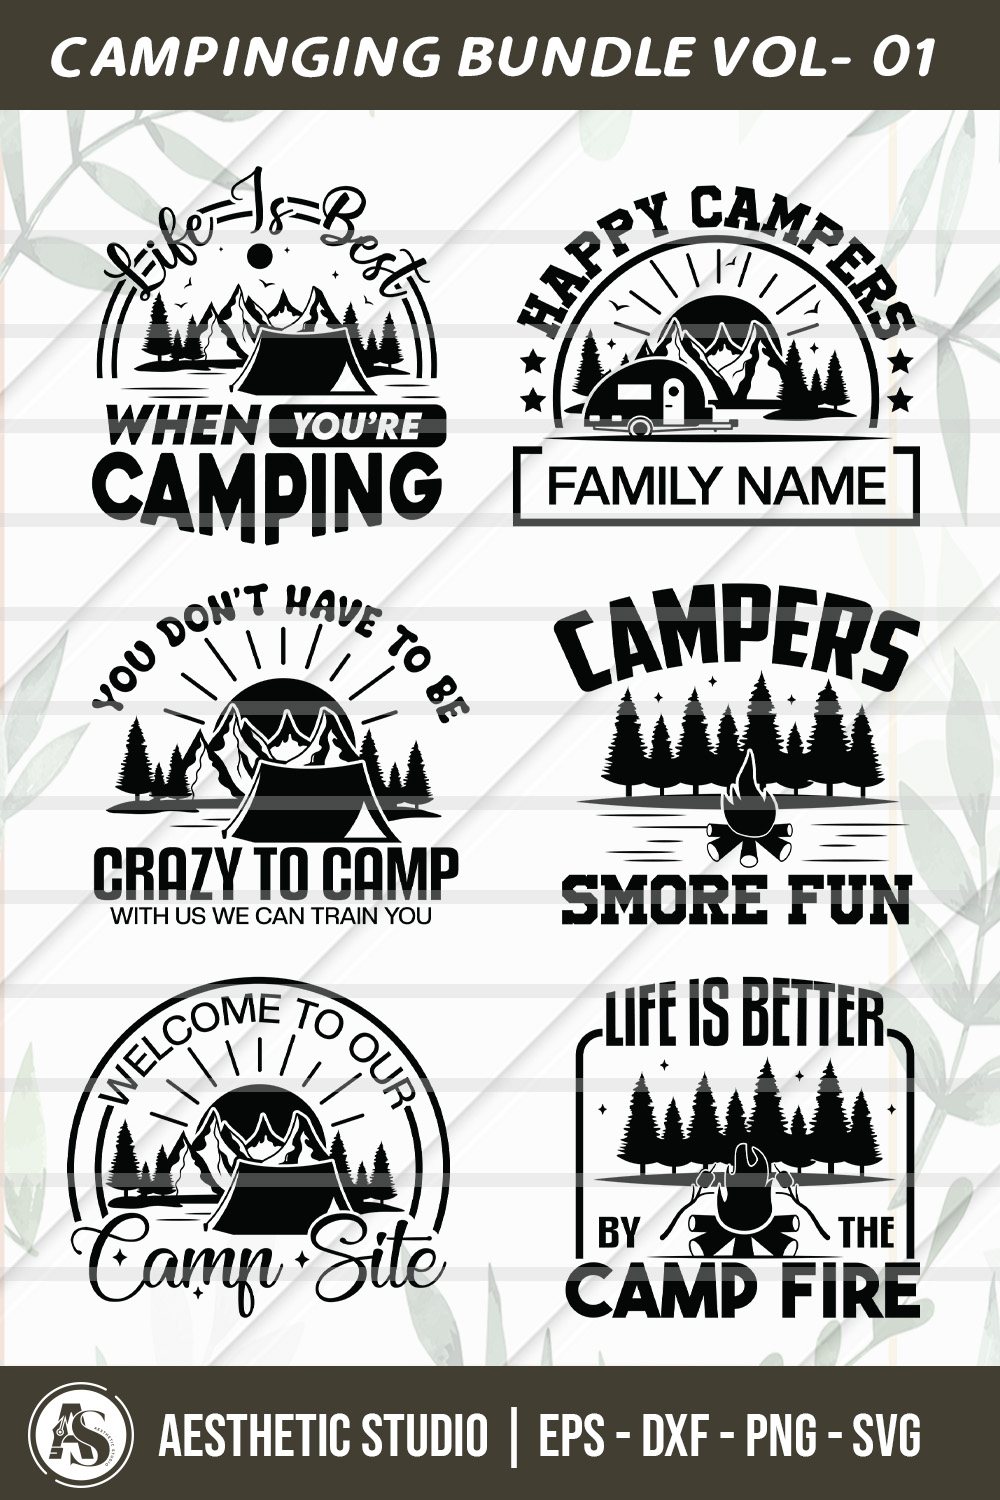 Life Is Best When You're Camping, Happy Campers, Crazy Camping Friends, Campers Have Smore Fun, Welcome To Our Camp Site, Life Is Better By The Camp Fire, SVG, Camping Quotes, Camping Bundle design, Svg, Eps, Dxf, Png, Cut file pinterest preview image.